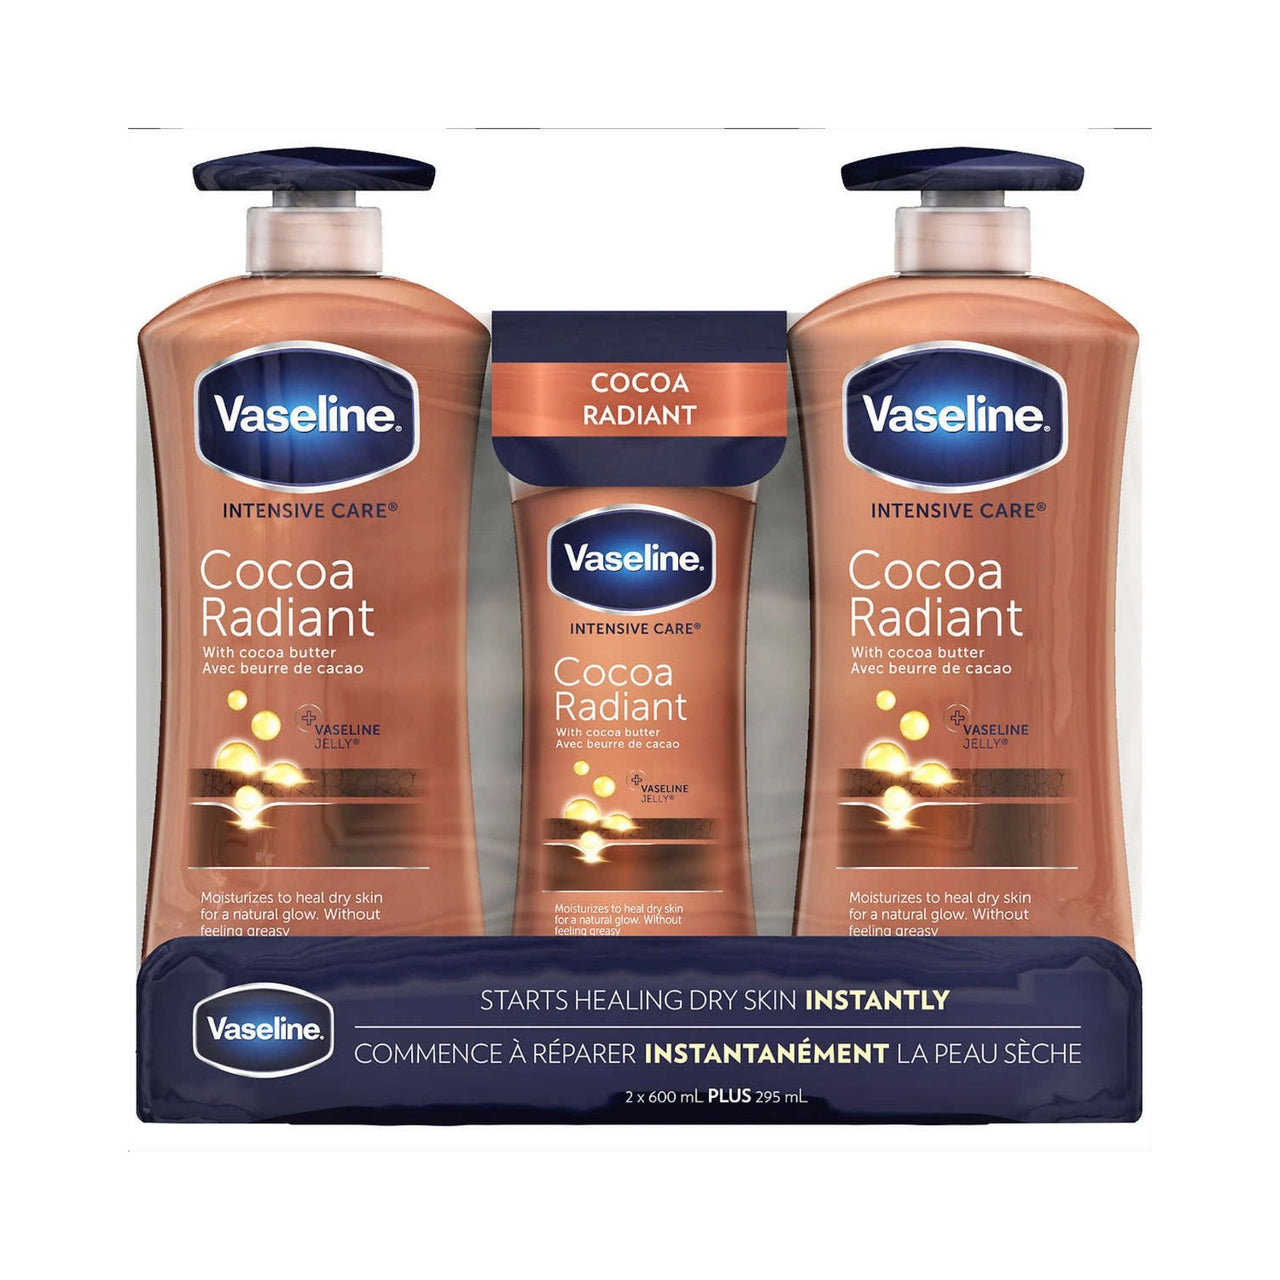 Image of Vaseline Intensive Care Cocoa Radiant Body Lotion 2x600ml + 295ml